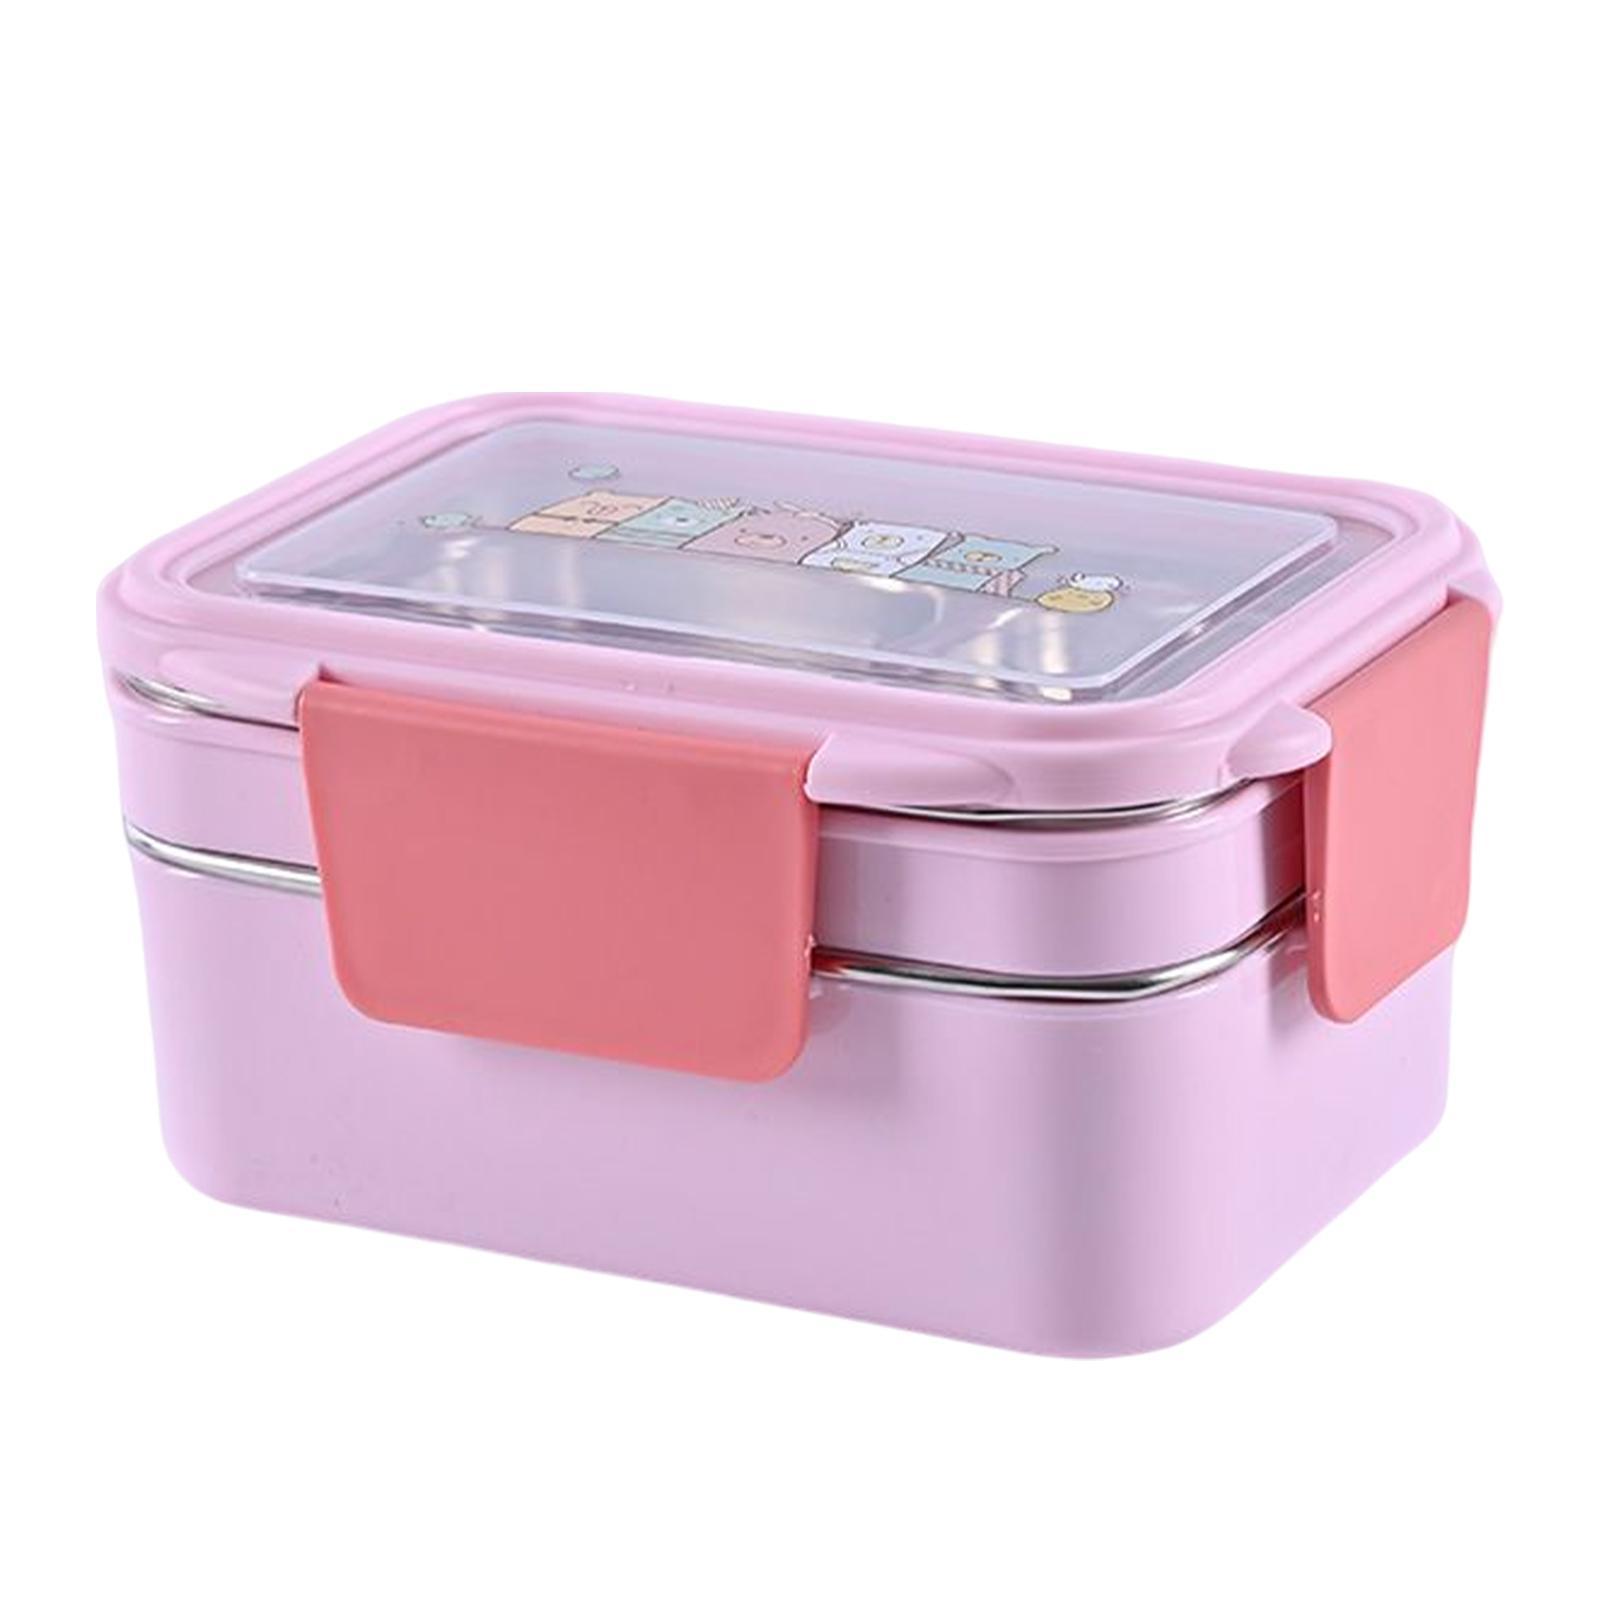 Stainless Steel Bento Box, with Divided Compartments Food Container for Outdoor Camping